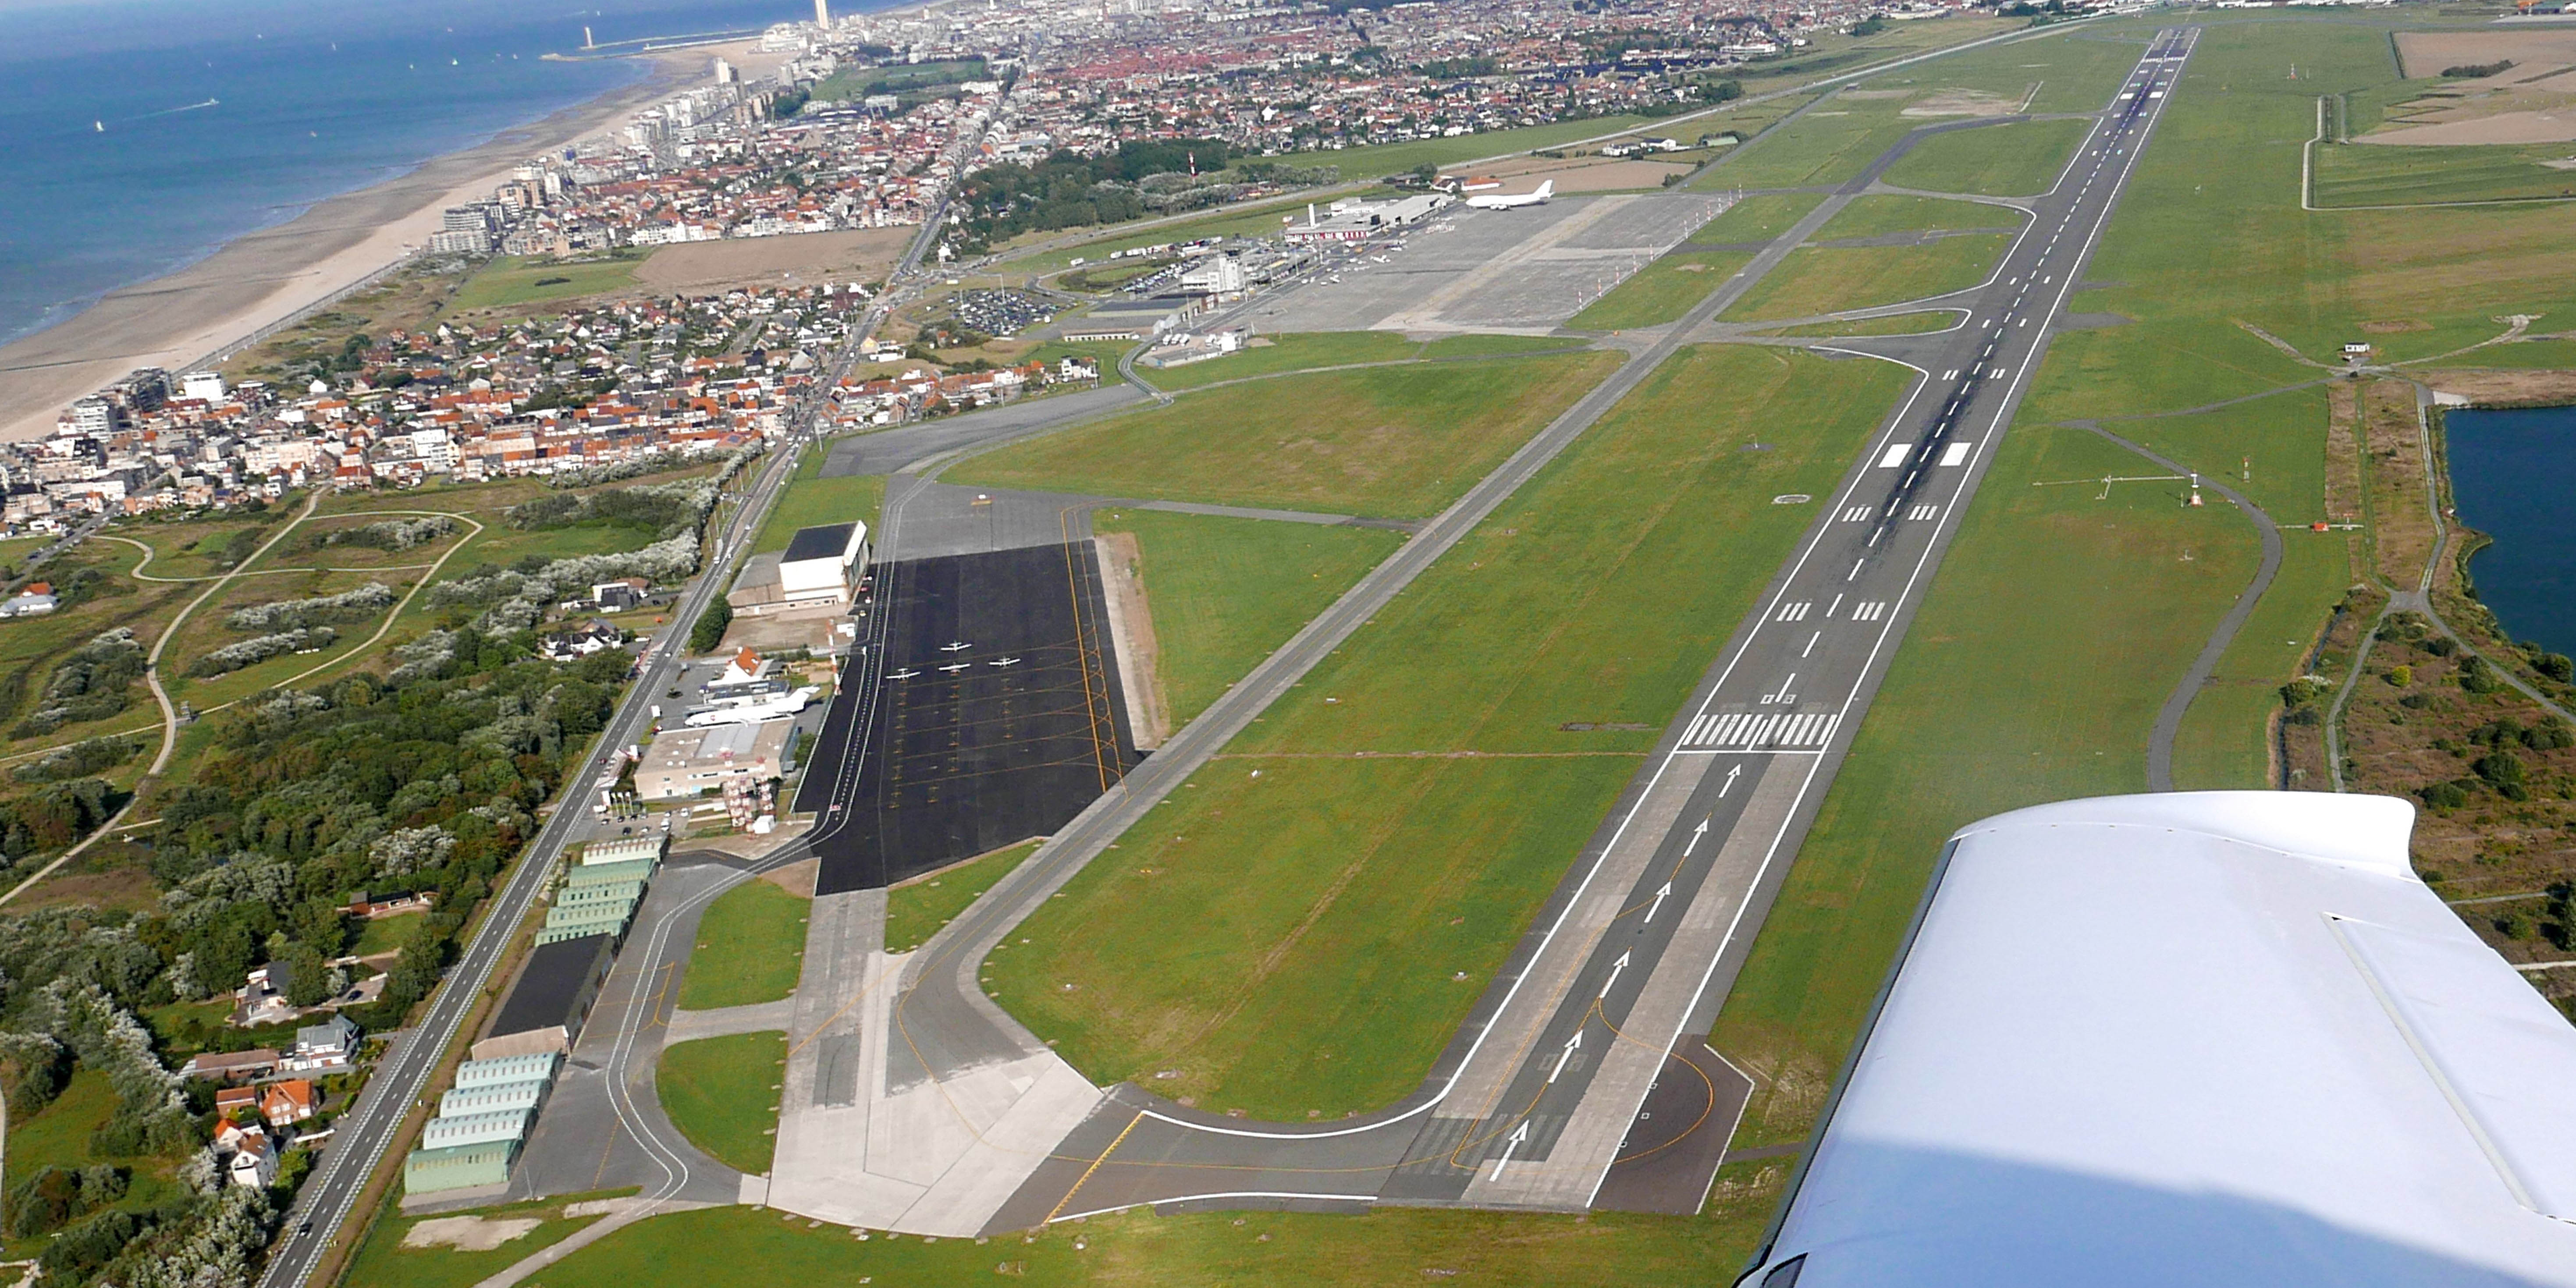 Case study: reduced CO2 emissions at the Ostend airport